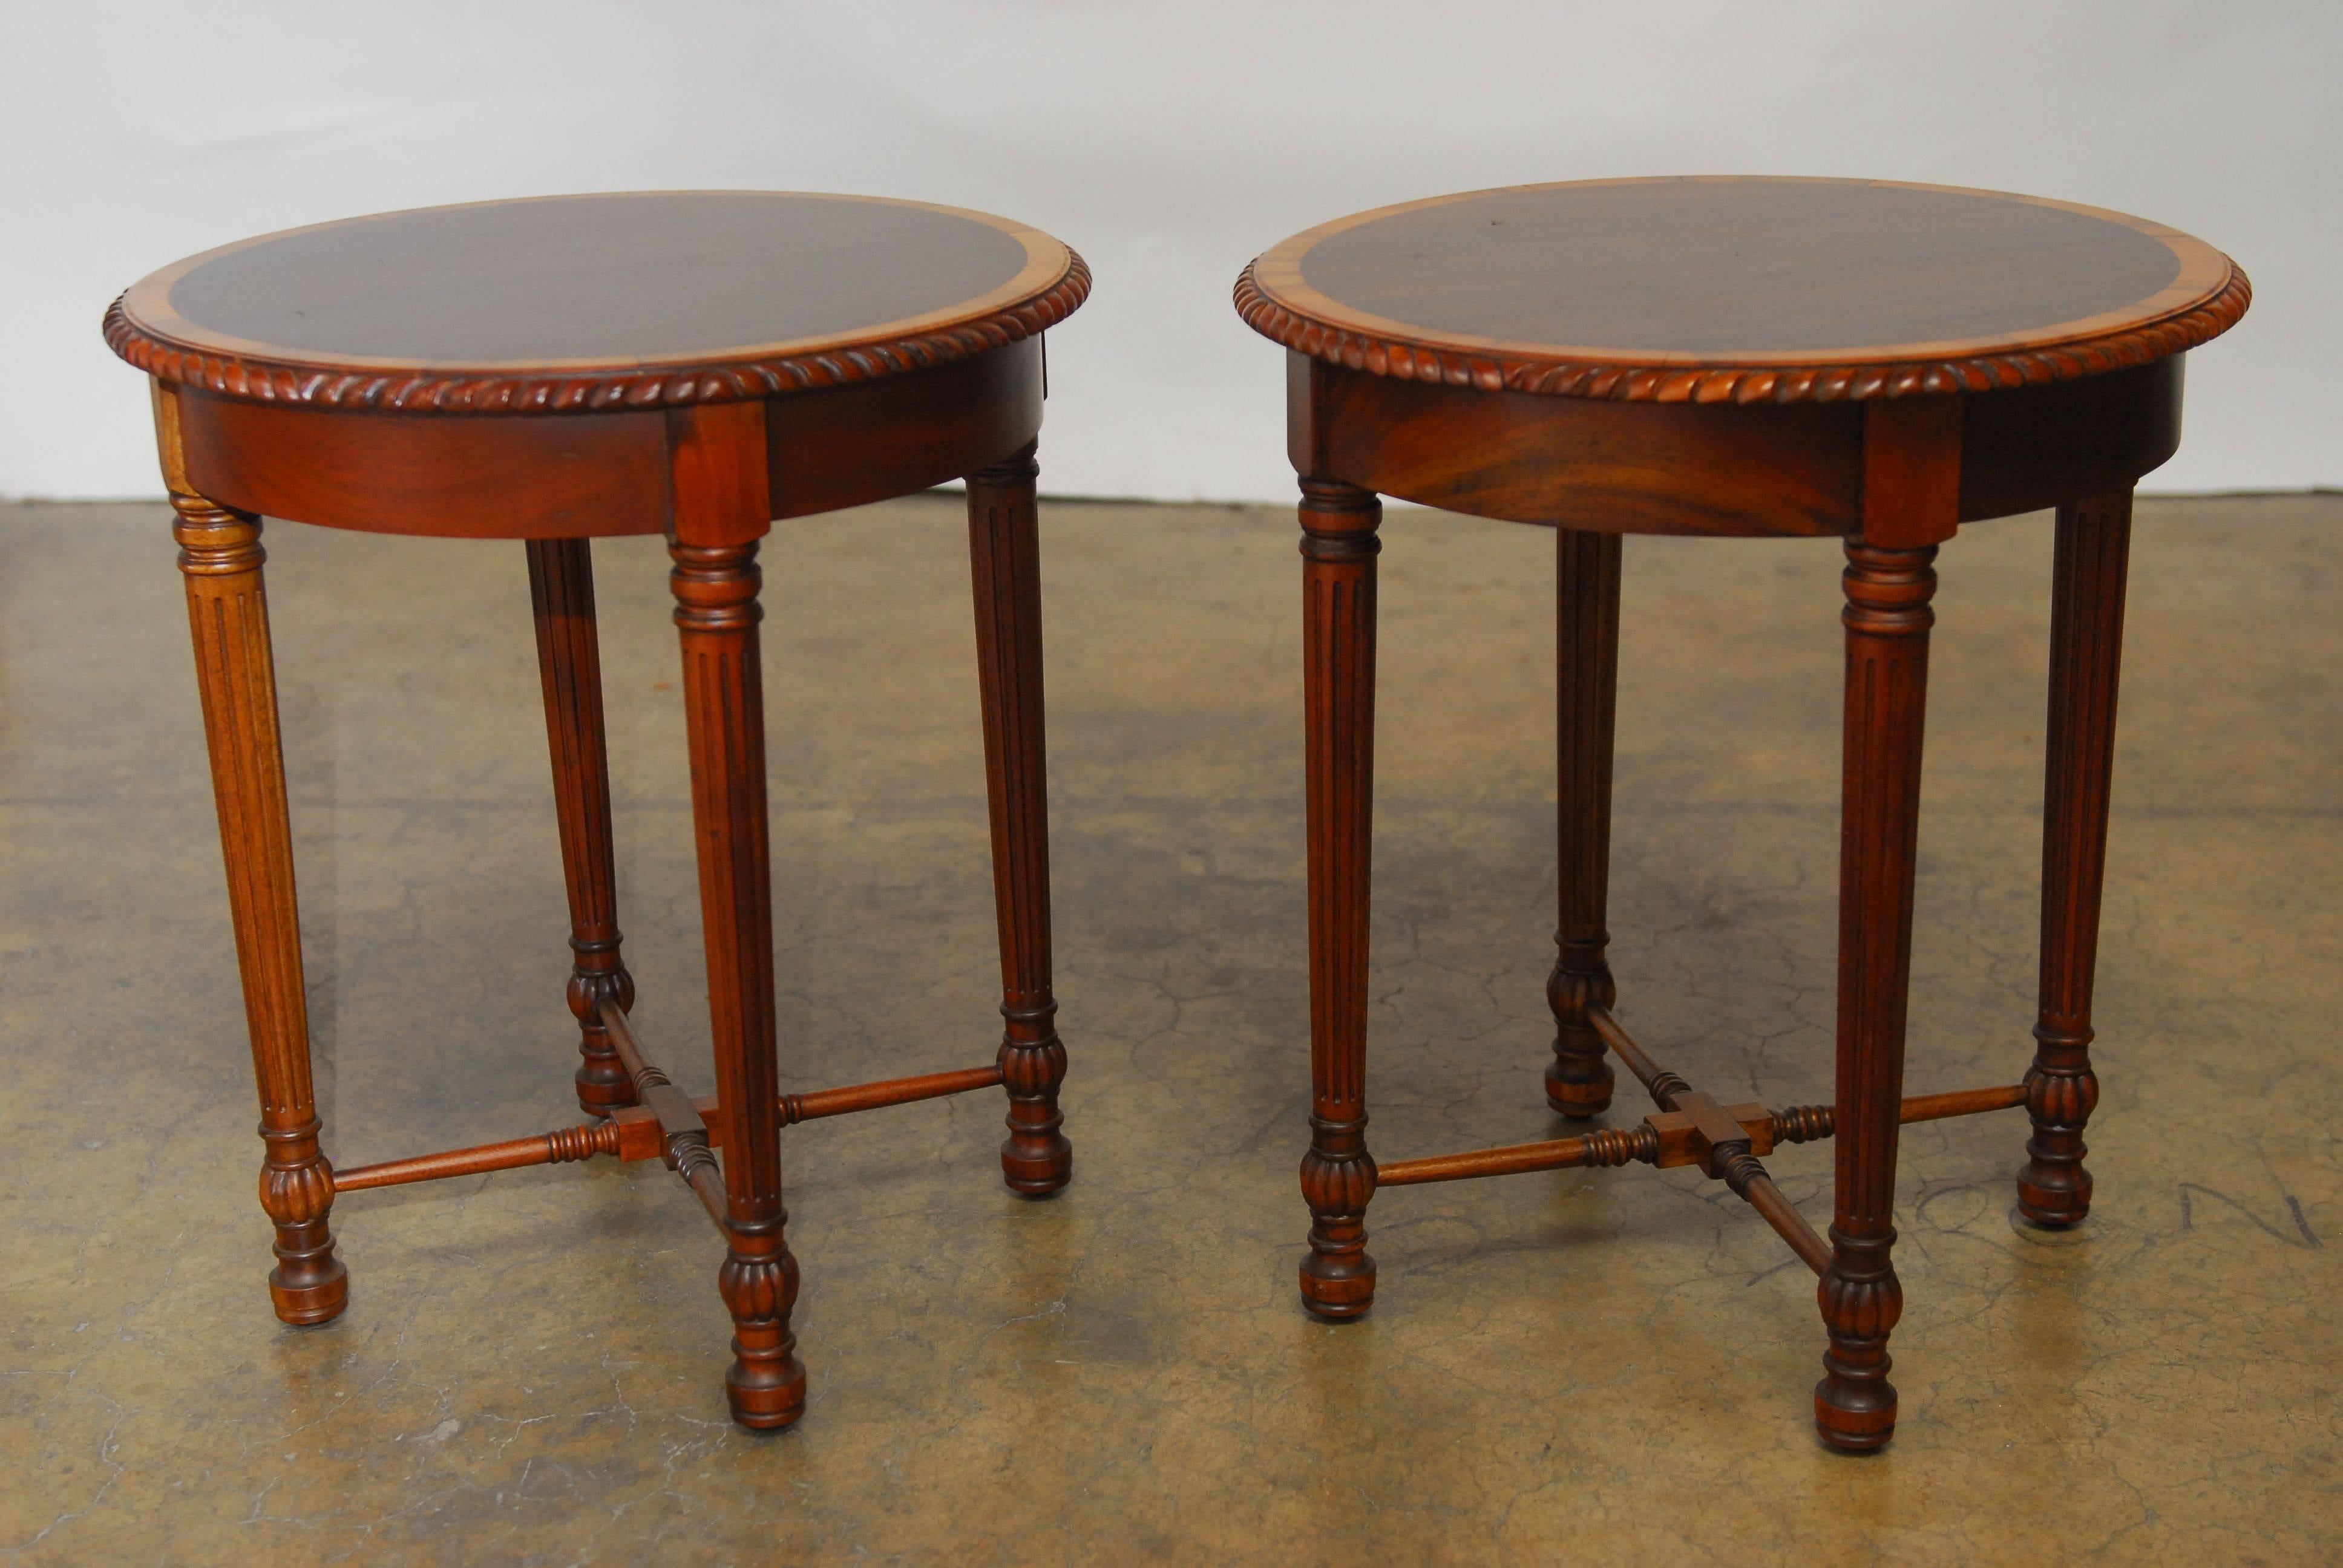 Exquisite pair of round hand-carved mahogany side tables featuring a gadrooned round edge and contrasting mahogany inlay. Supported by four reeded tapering legs and conjoined by a turned cross stretcher. Impressive quality and workmanship. Perfect